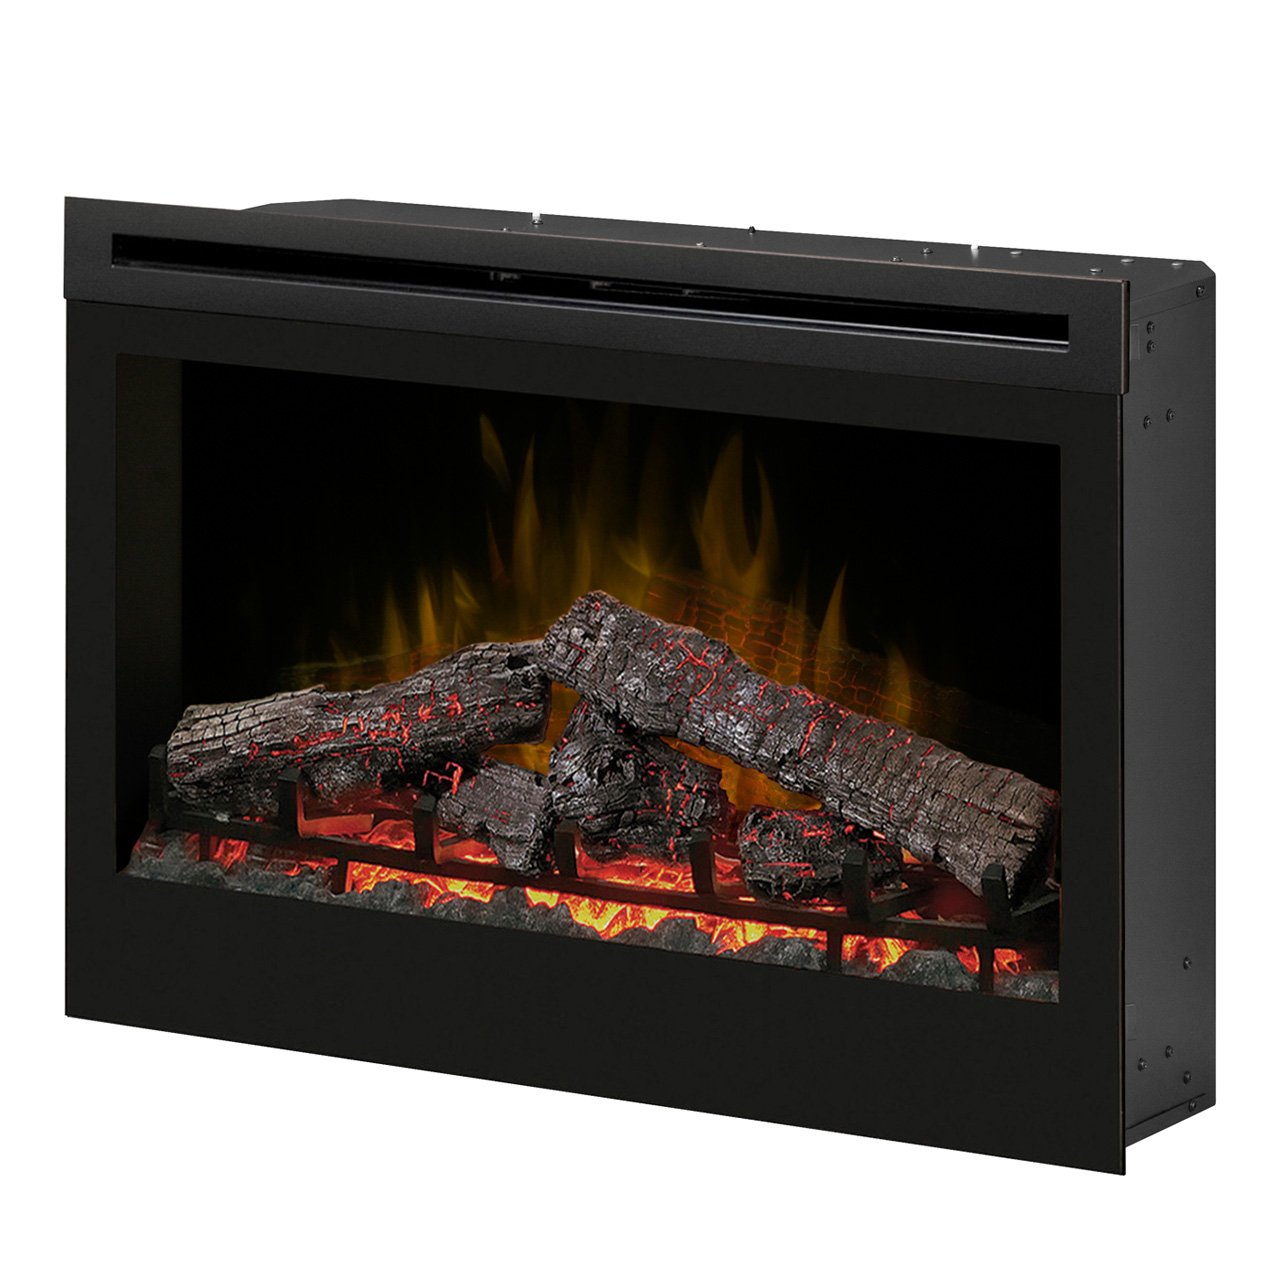 Where to Buy Gas Fireplace Beautiful Dimplex Df3033st 33 Inch Self Trimming Electric Fireplace Insert